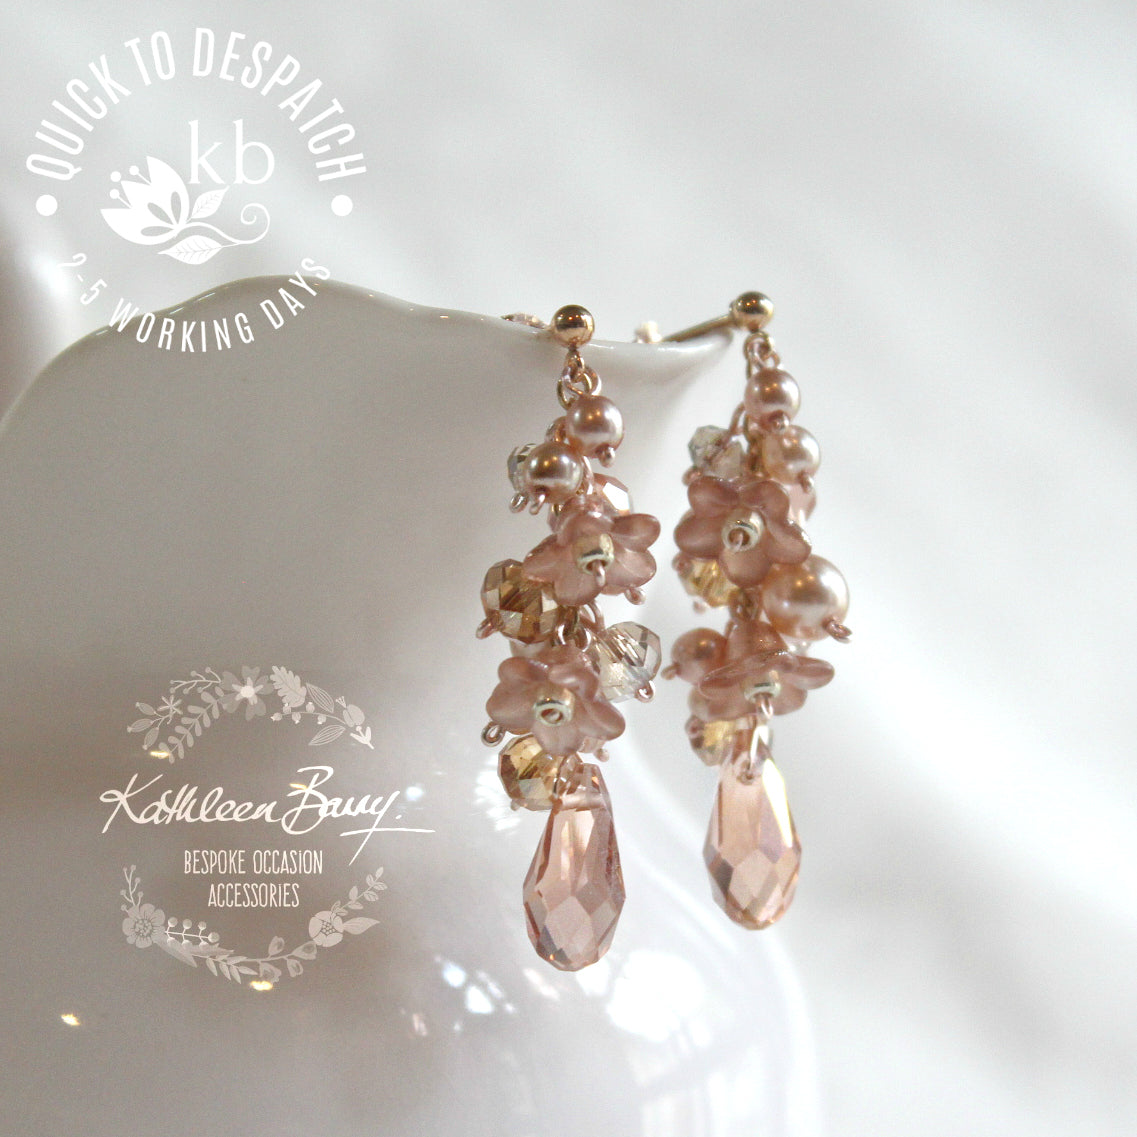 Christine earrings - Blush Pink or Off-white - Rose gold, pale gold or silver